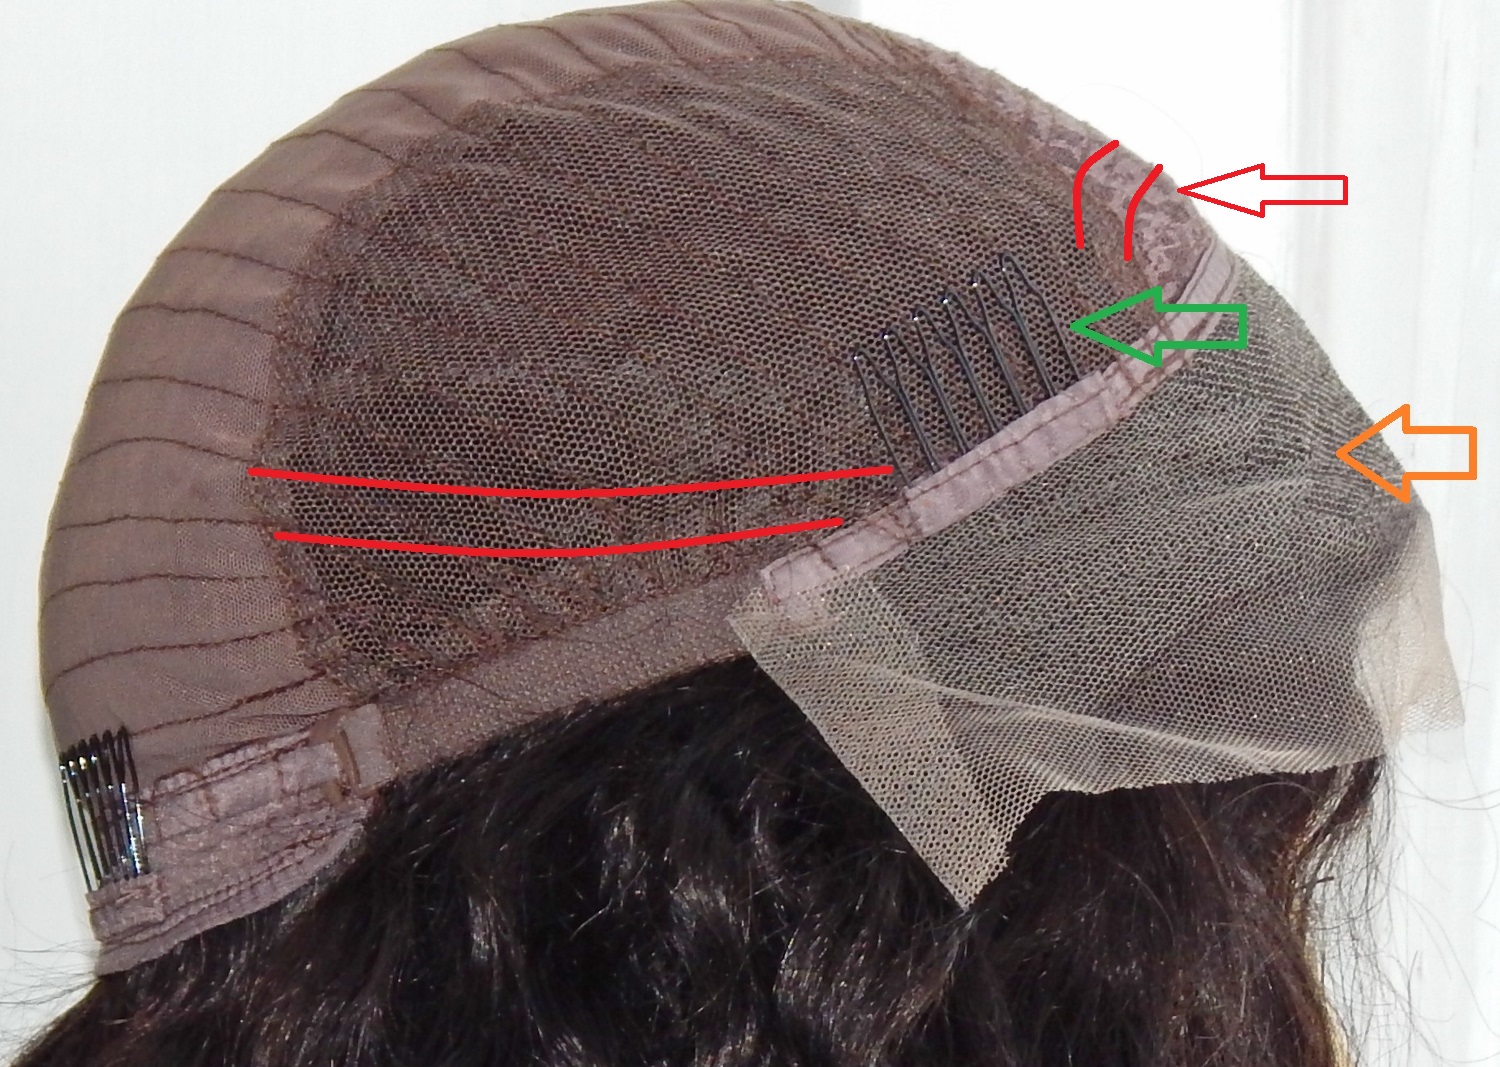 How To Secure A Wig Without Using Glue